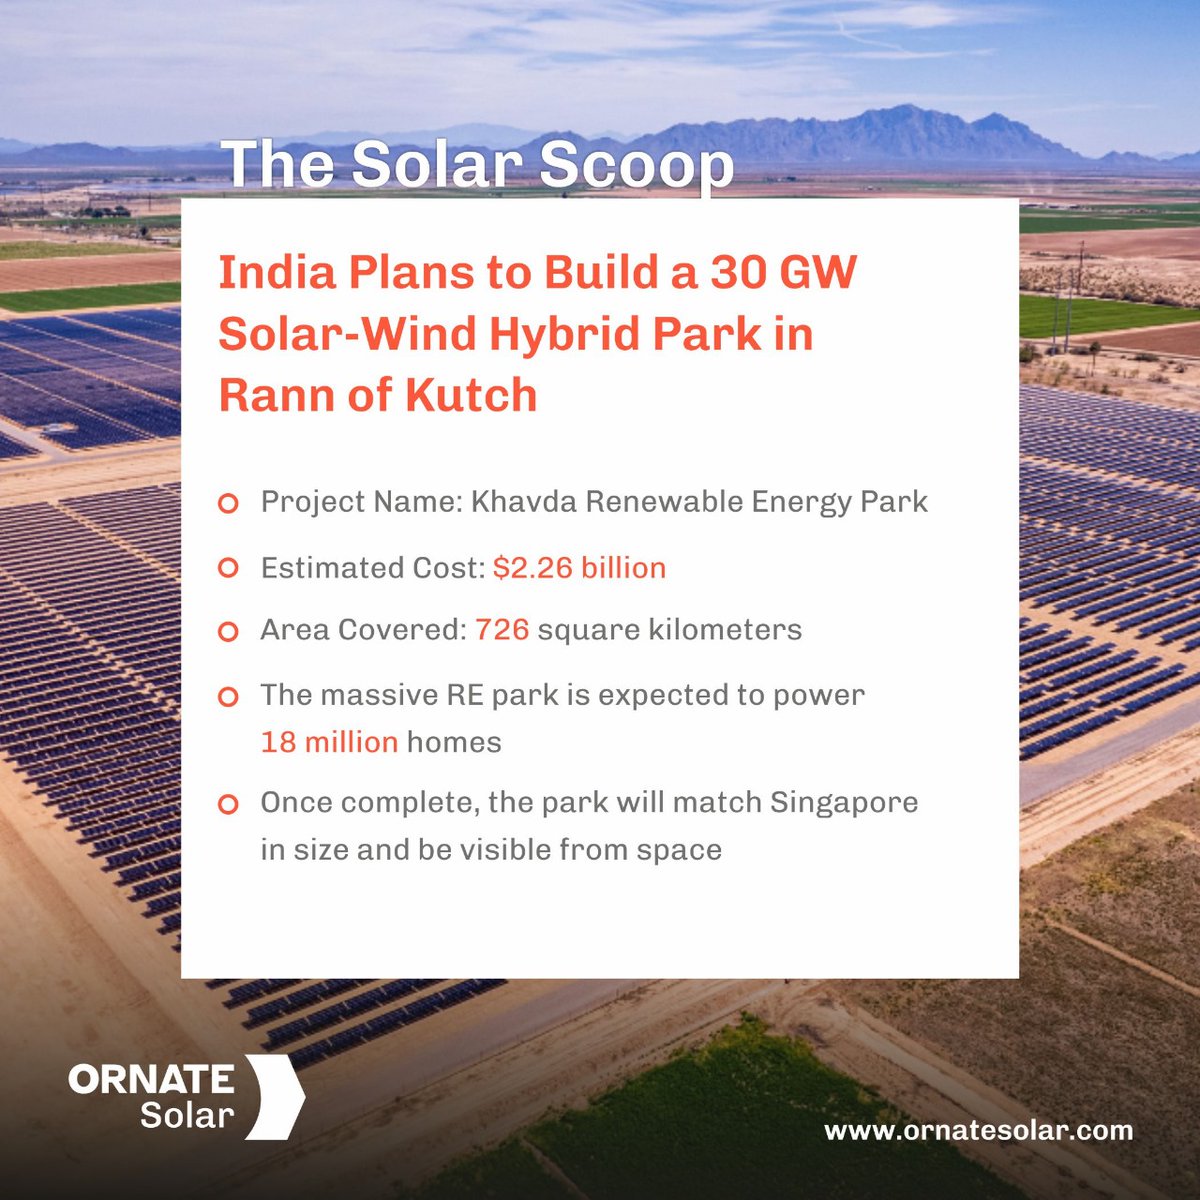 The Indian government is building the world’s largest renewable energy park in the salt marsh of Rann of Kutch, Gujarat! Six organizations are working together on this massive project which is set to be completed in 3 years.

Get the full scoop here👇🏽

#OrnateSolar #Solarscoop